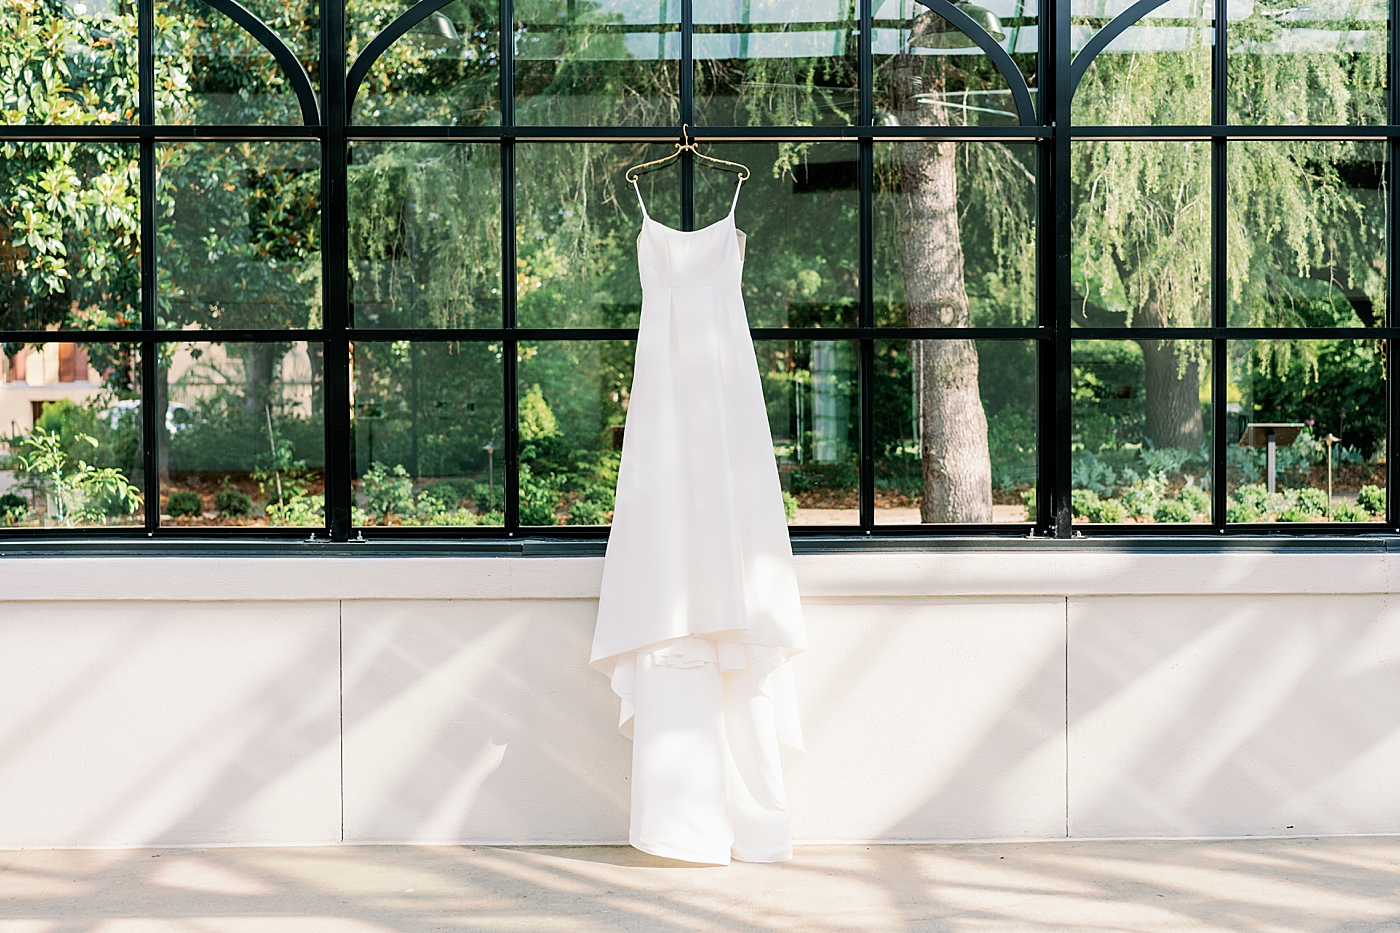 Bridal gown hanging in a greenhouse for summer inspired garden wedding | Photo by Annie Laura Photo